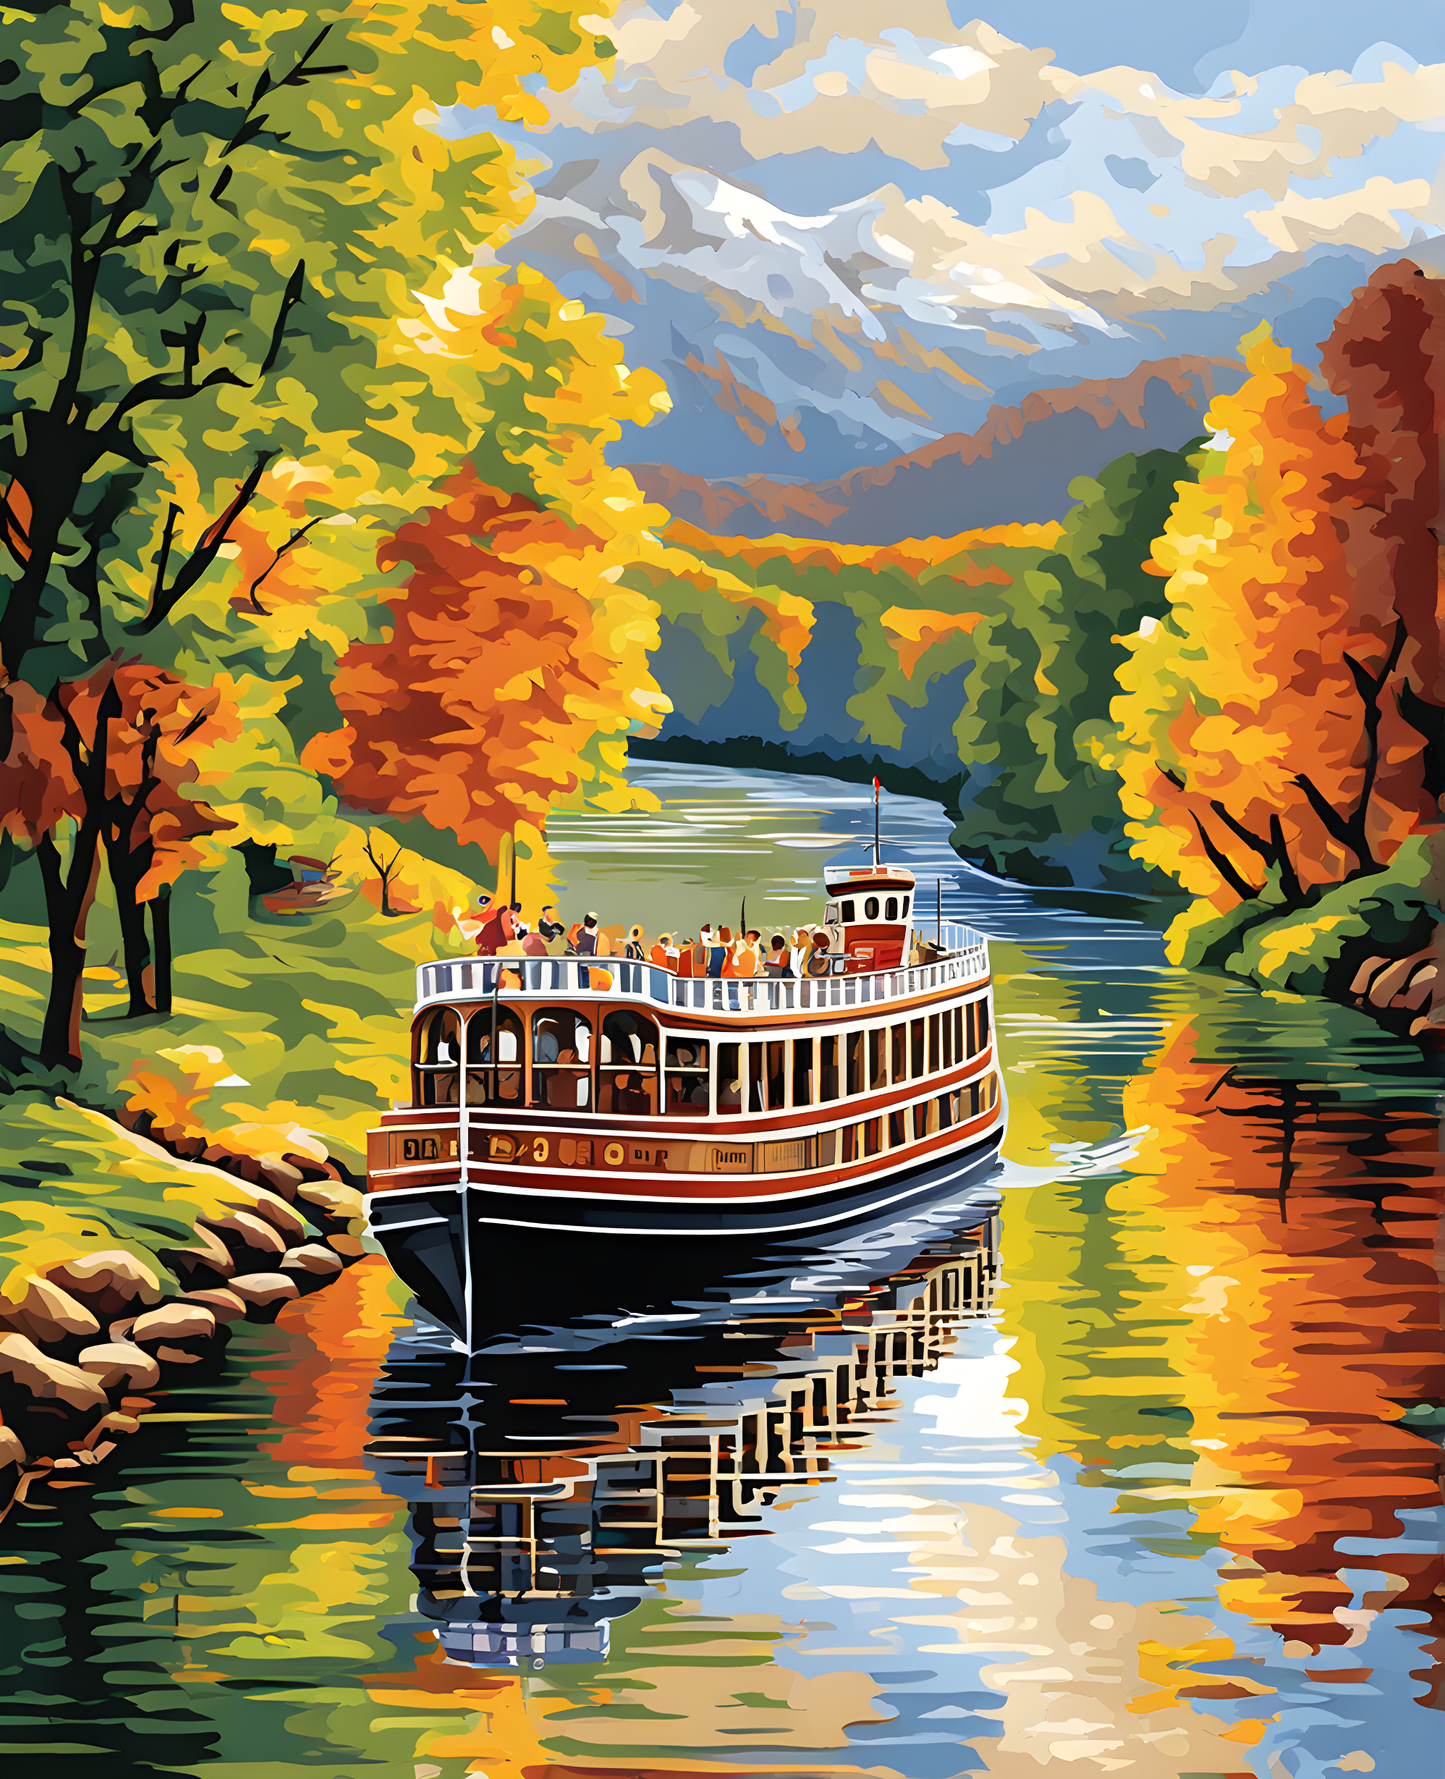 River Cruises (2) - Van-Go Paint-By-Number Kit